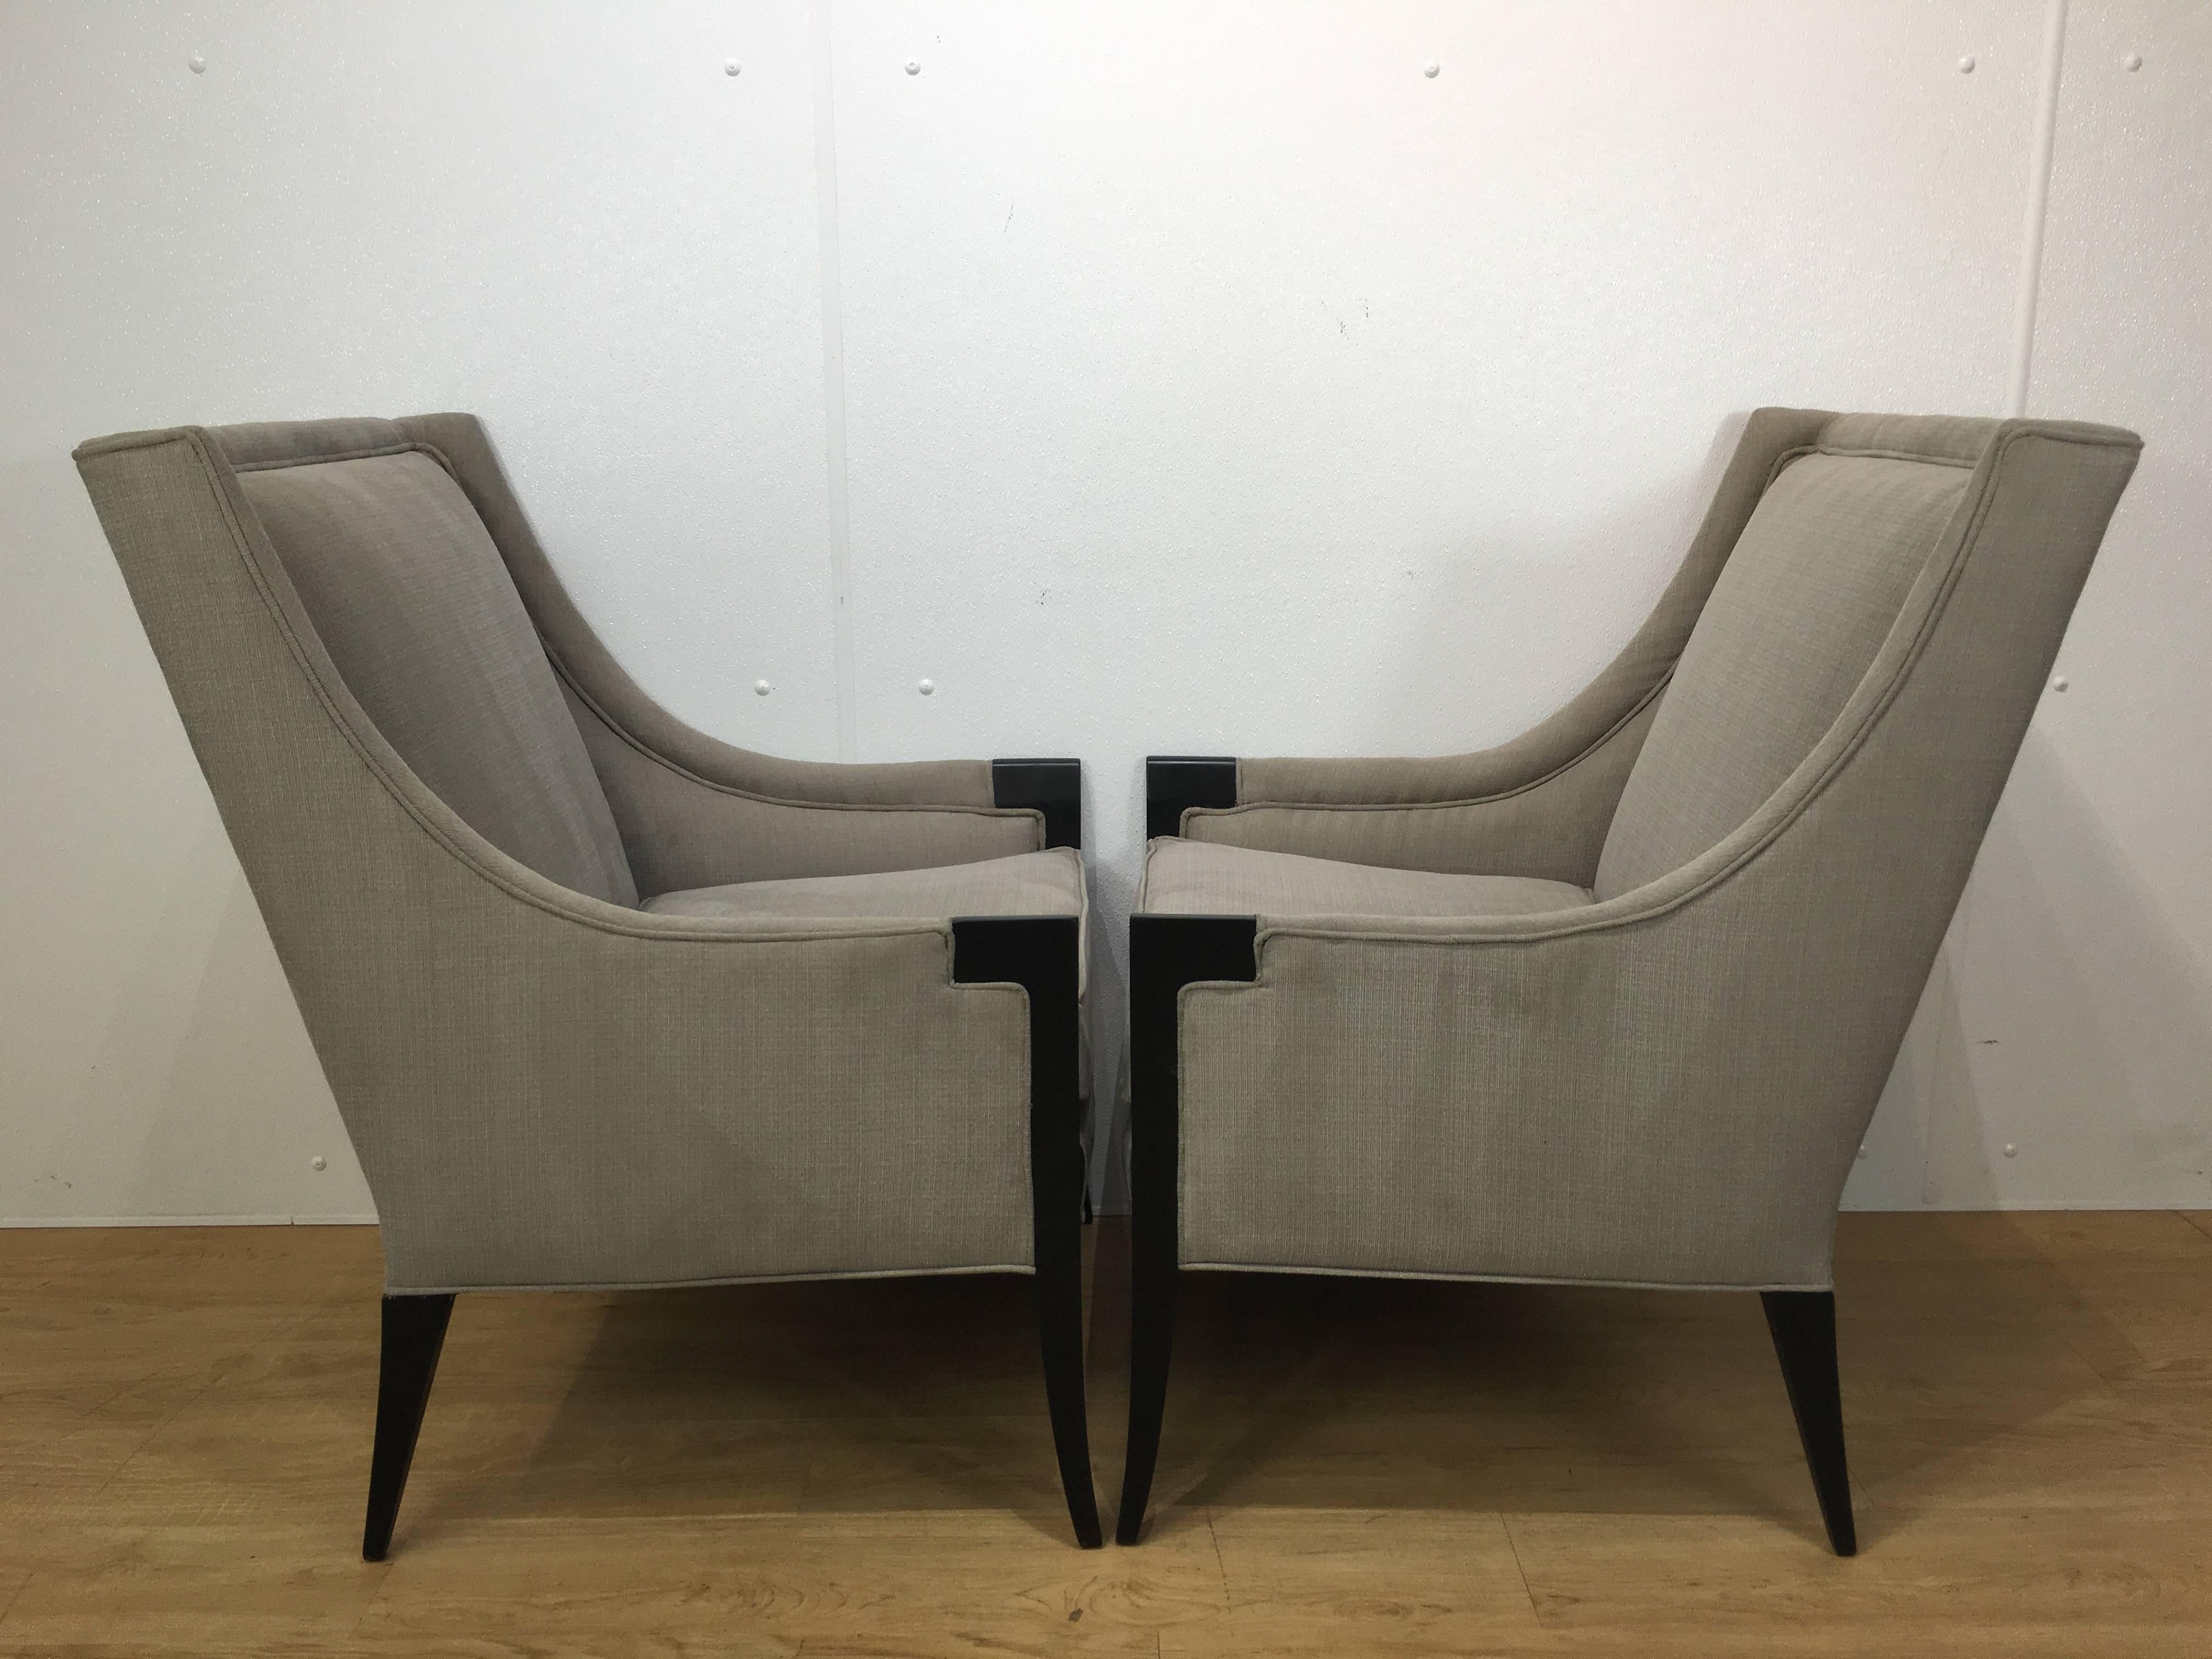 A pair of attributed Edward Wormley for Dunbar chairs newly upholstered in neutral grey fabric with ebonized frames.